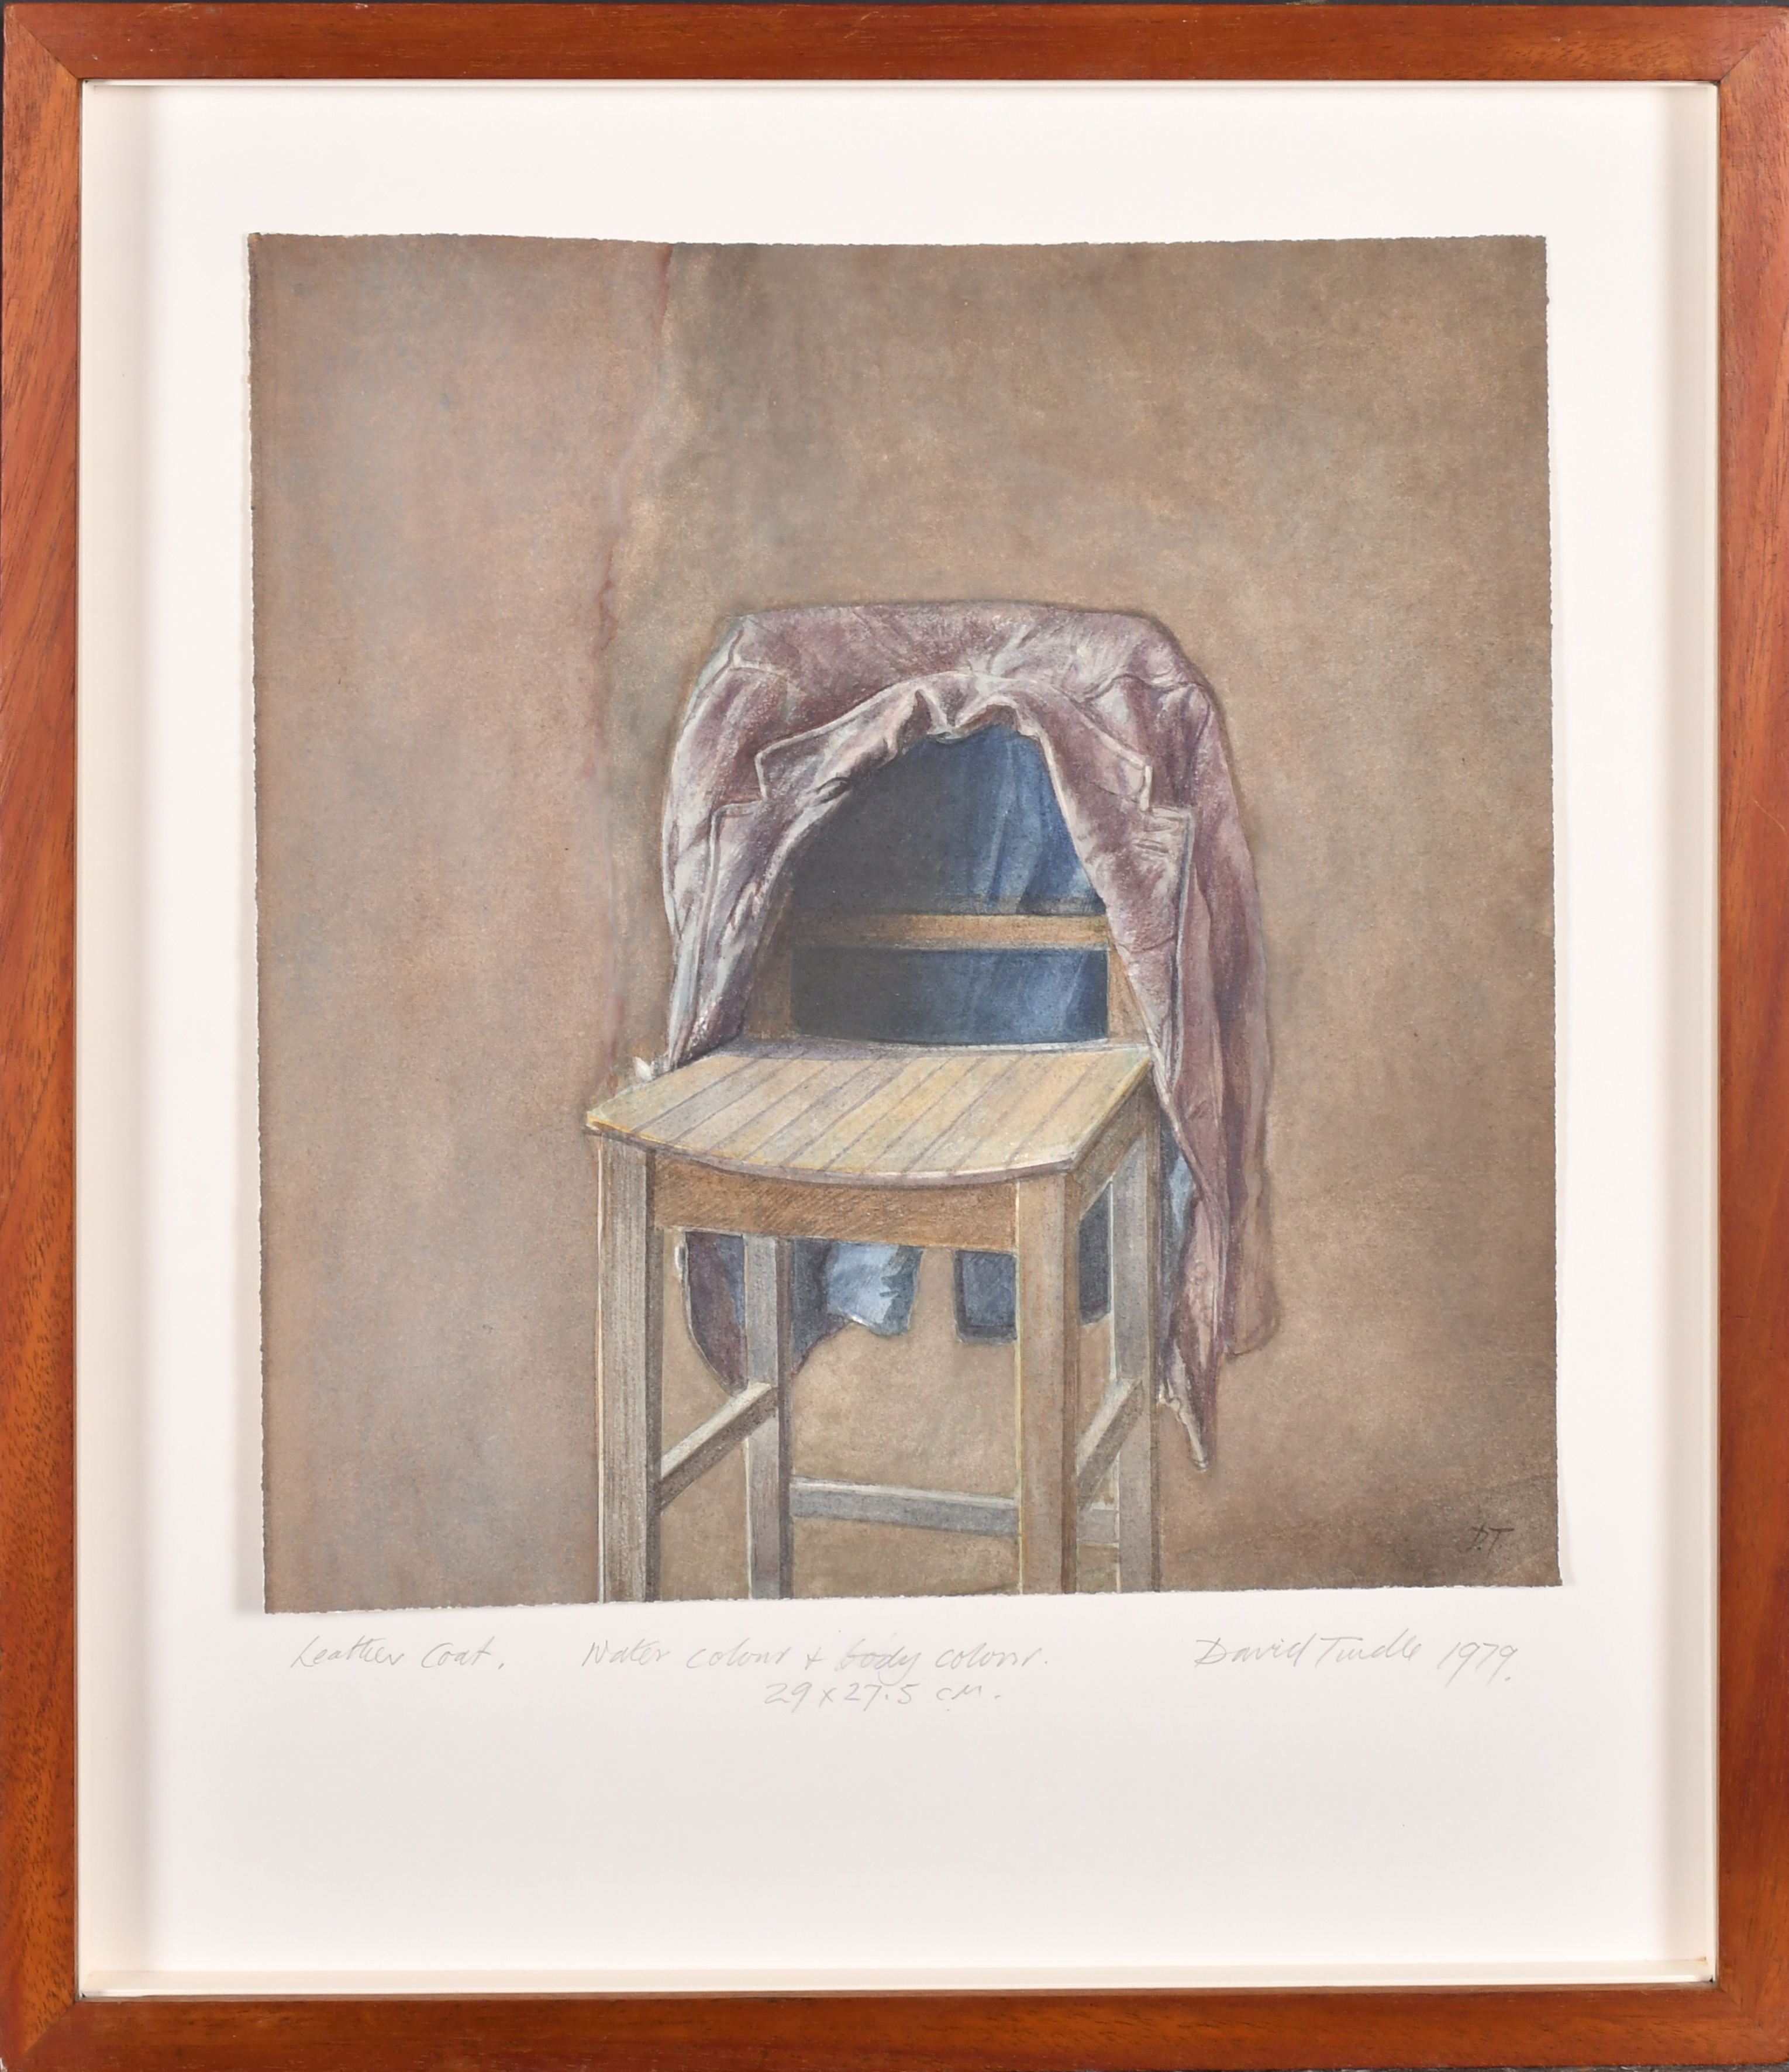 David Tindle (1932- ) British. "Leather Coat", Watercolour and bodycolour, Signed with initials, and - Image 2 of 4